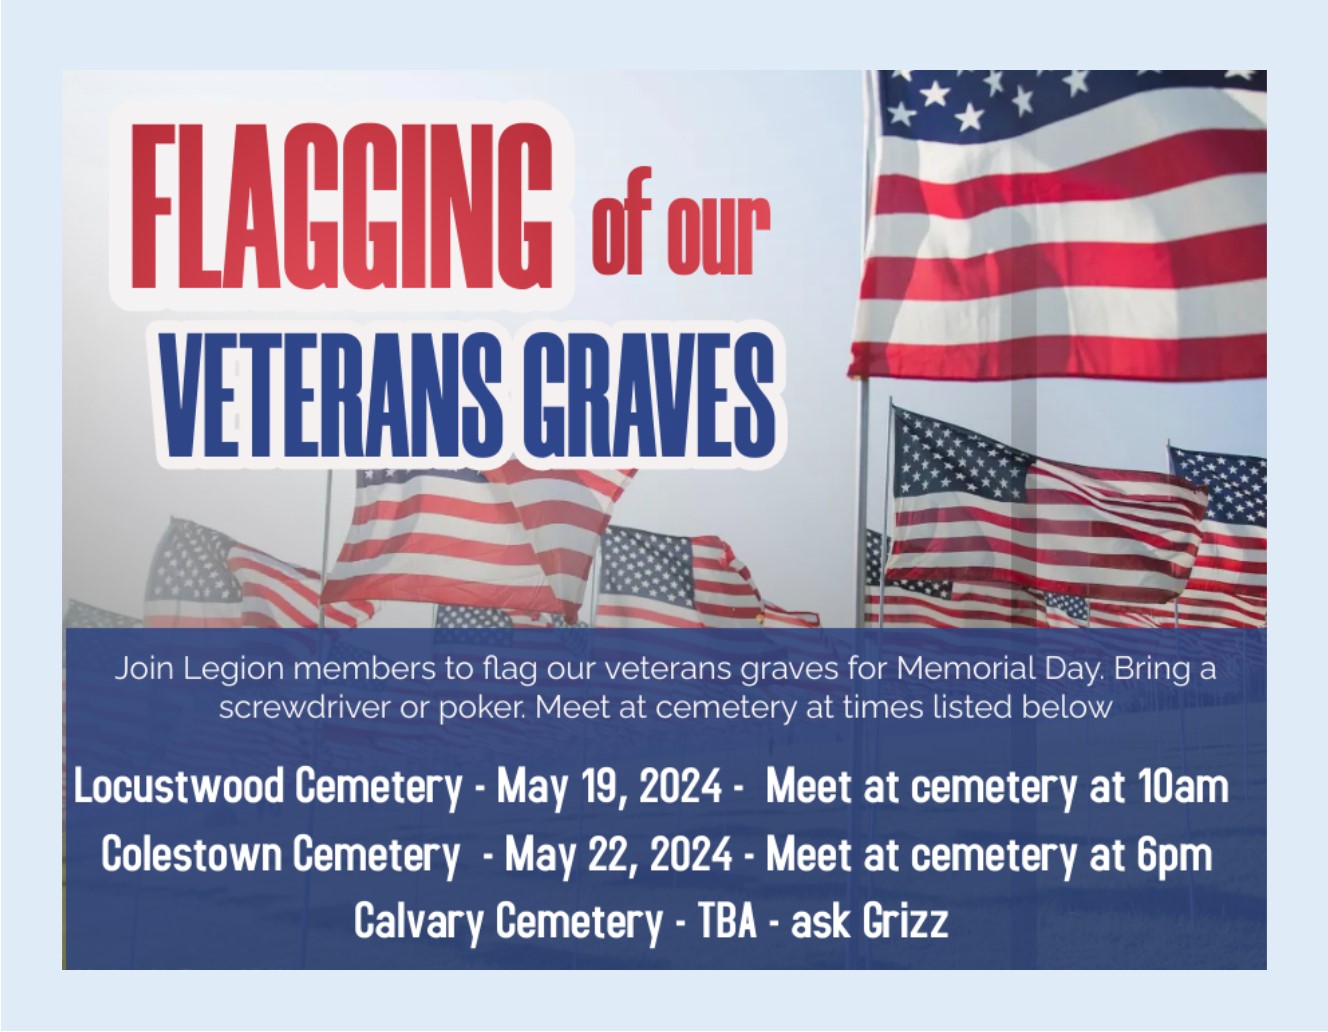 Flagging of graves at Locustwood Cemetery